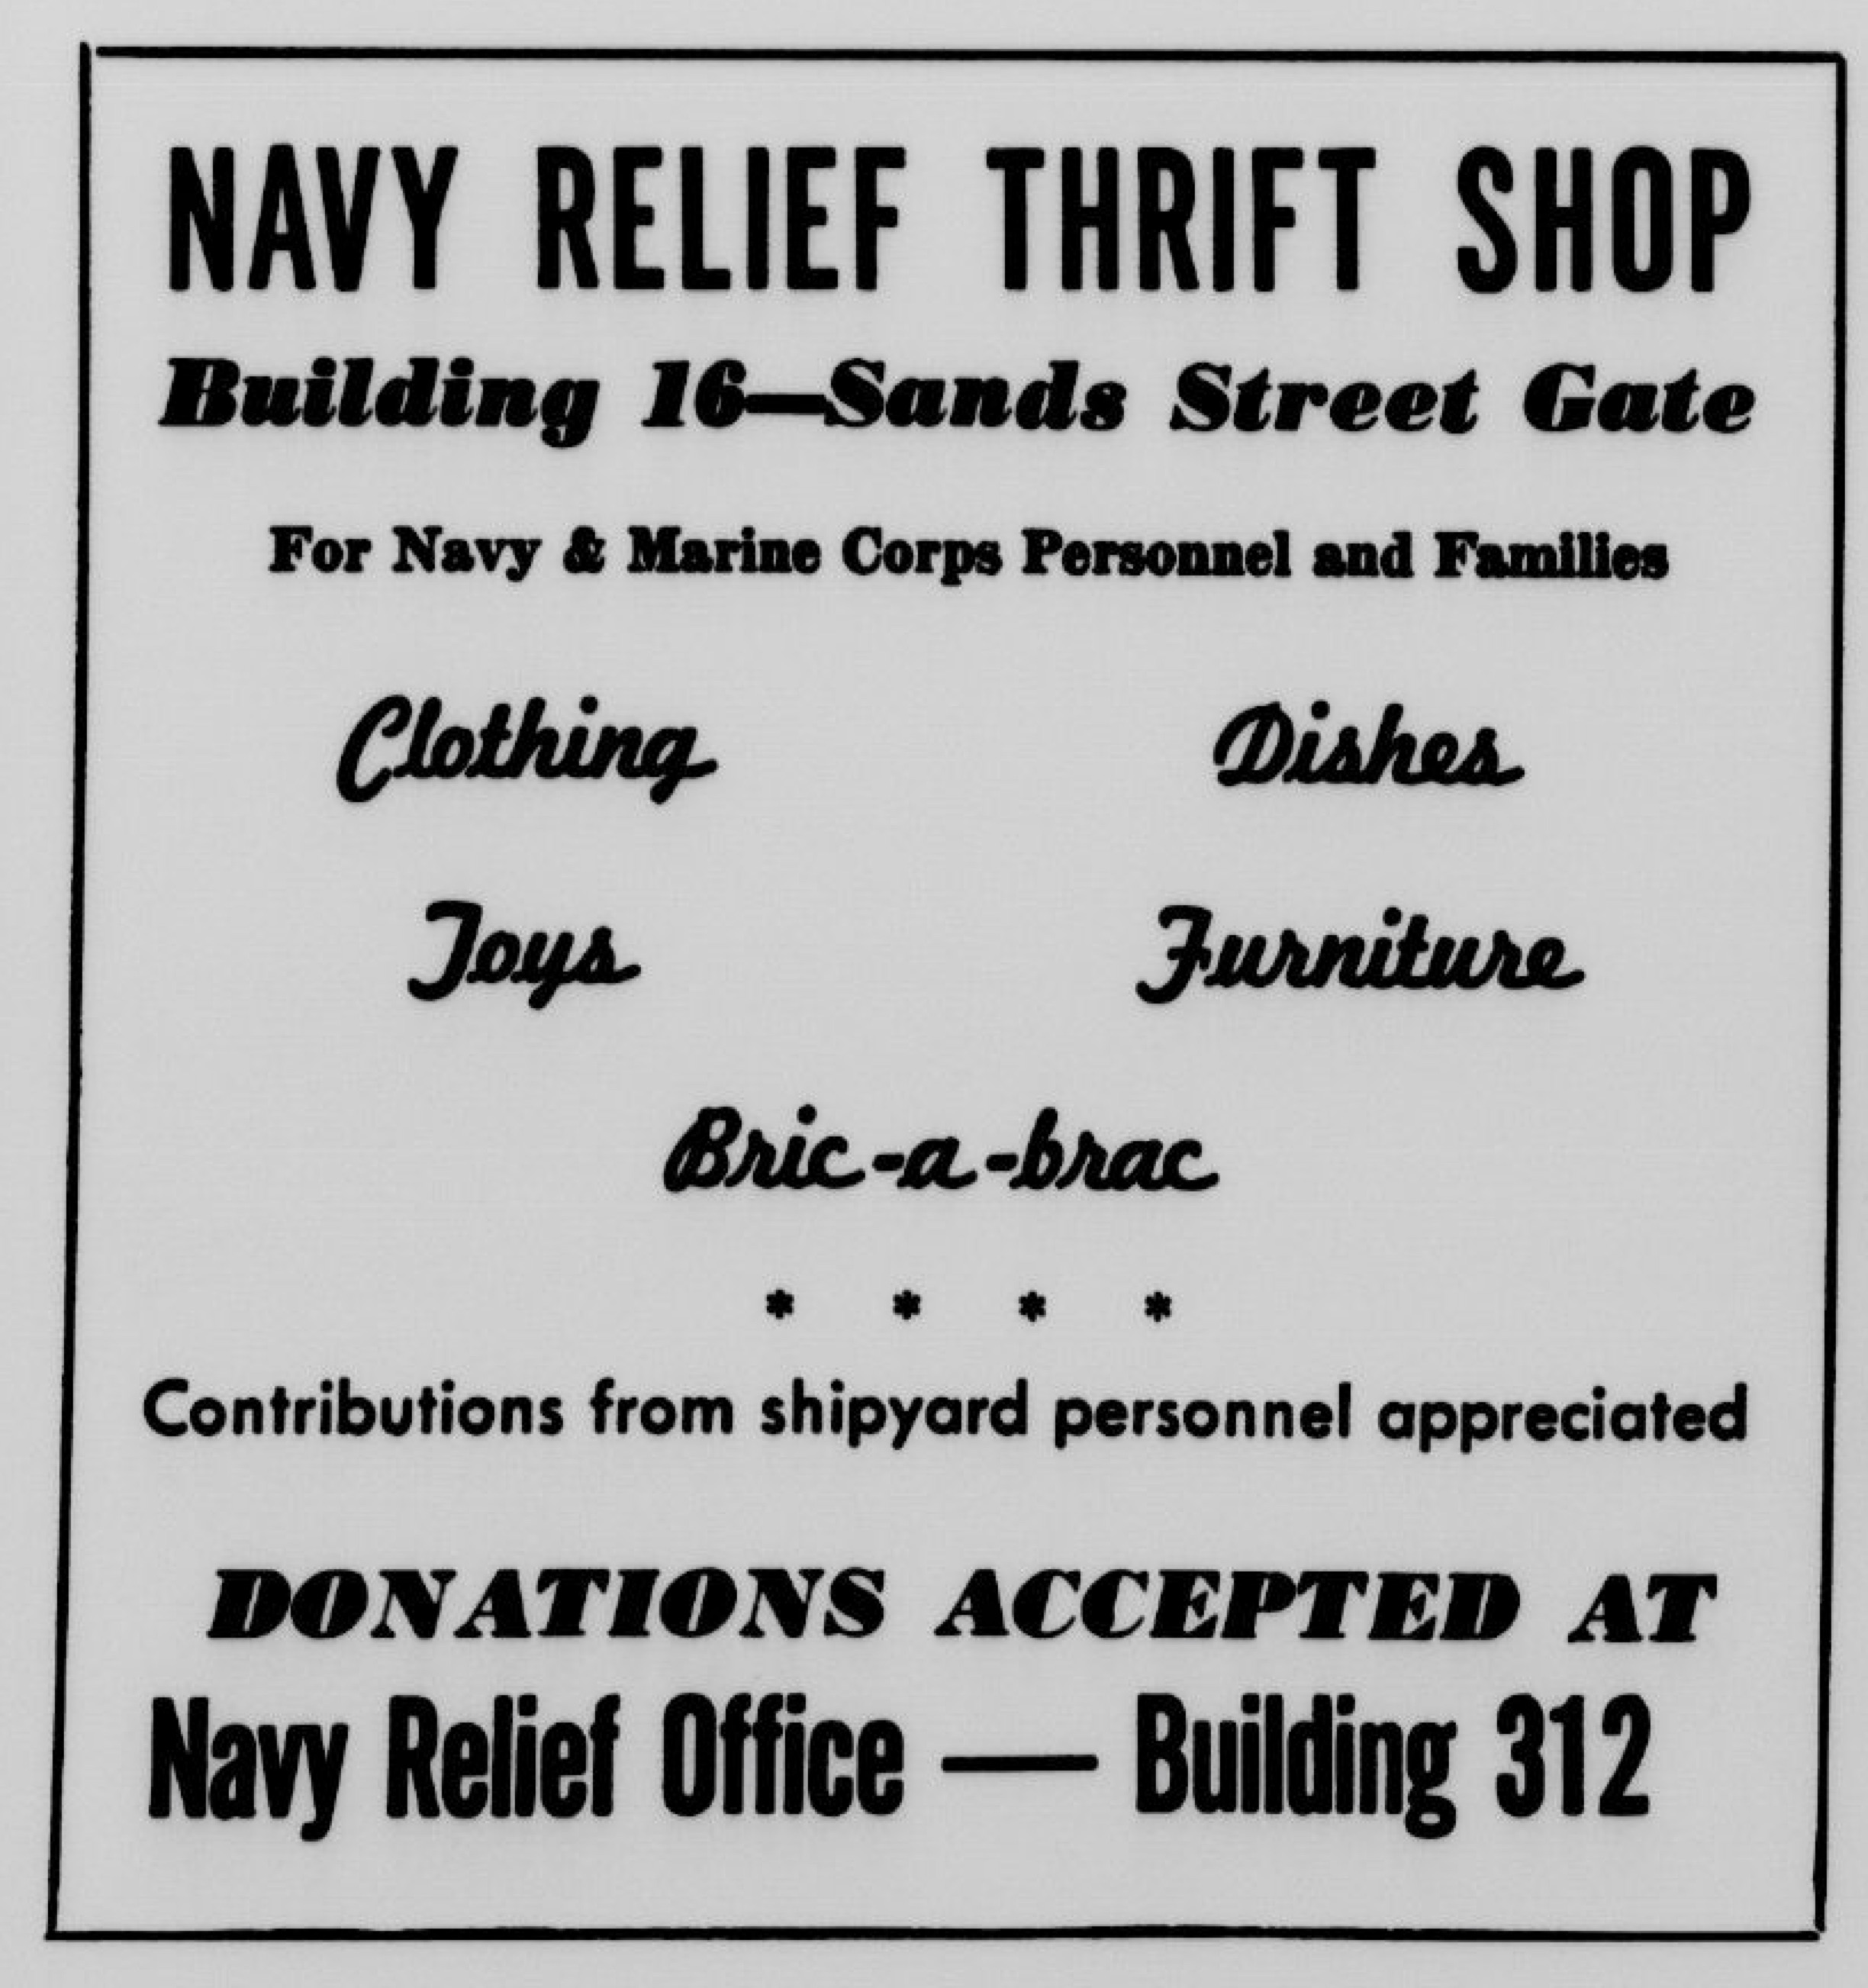 Newspaper ad for Navy Relief Thrift Shop.